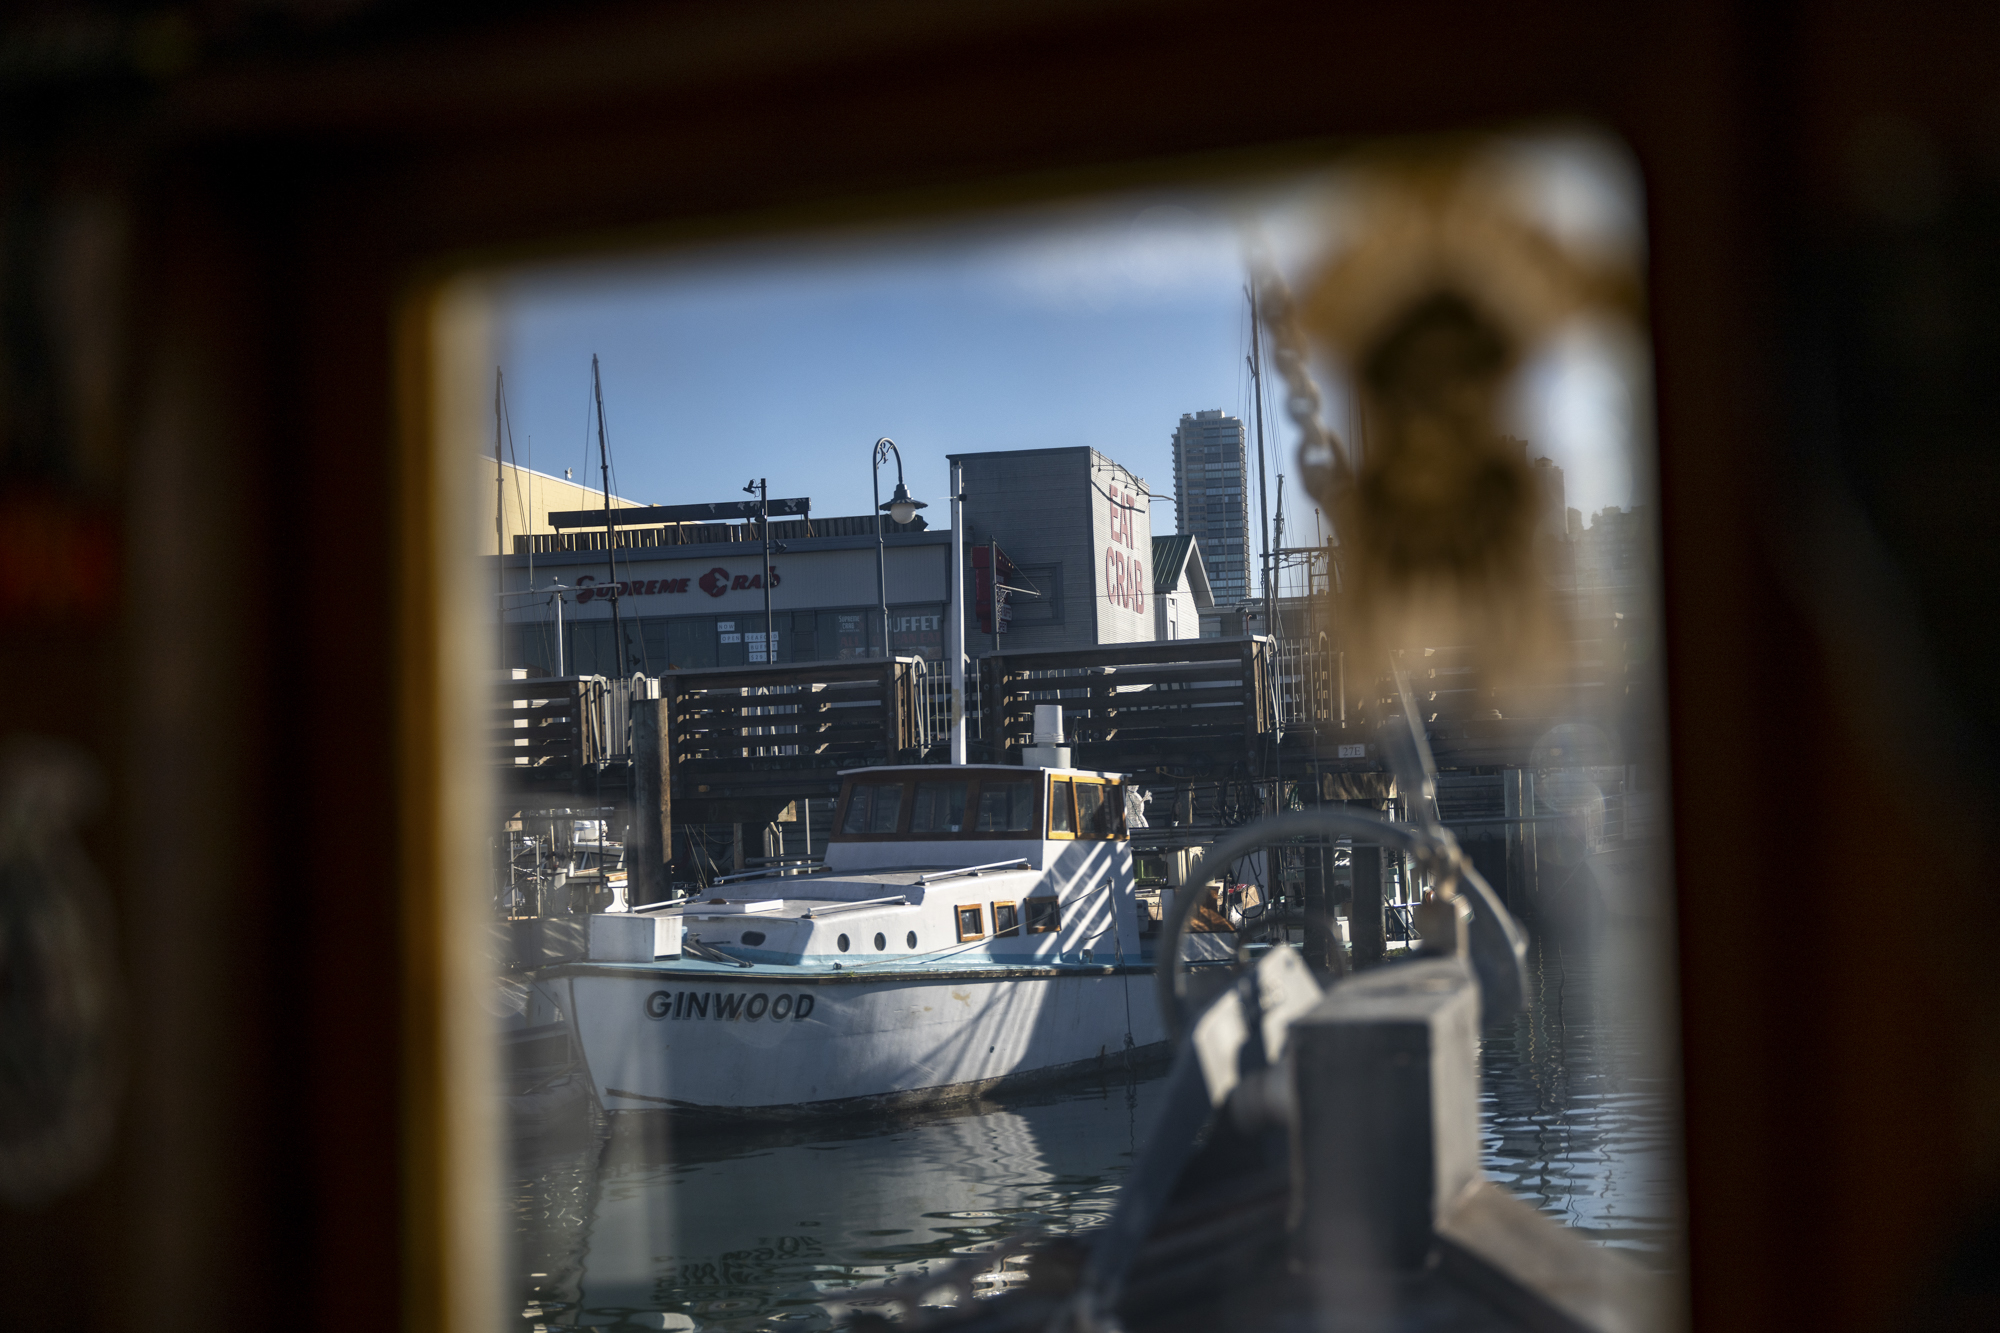 A boat docked in a harbor is seen through a window.